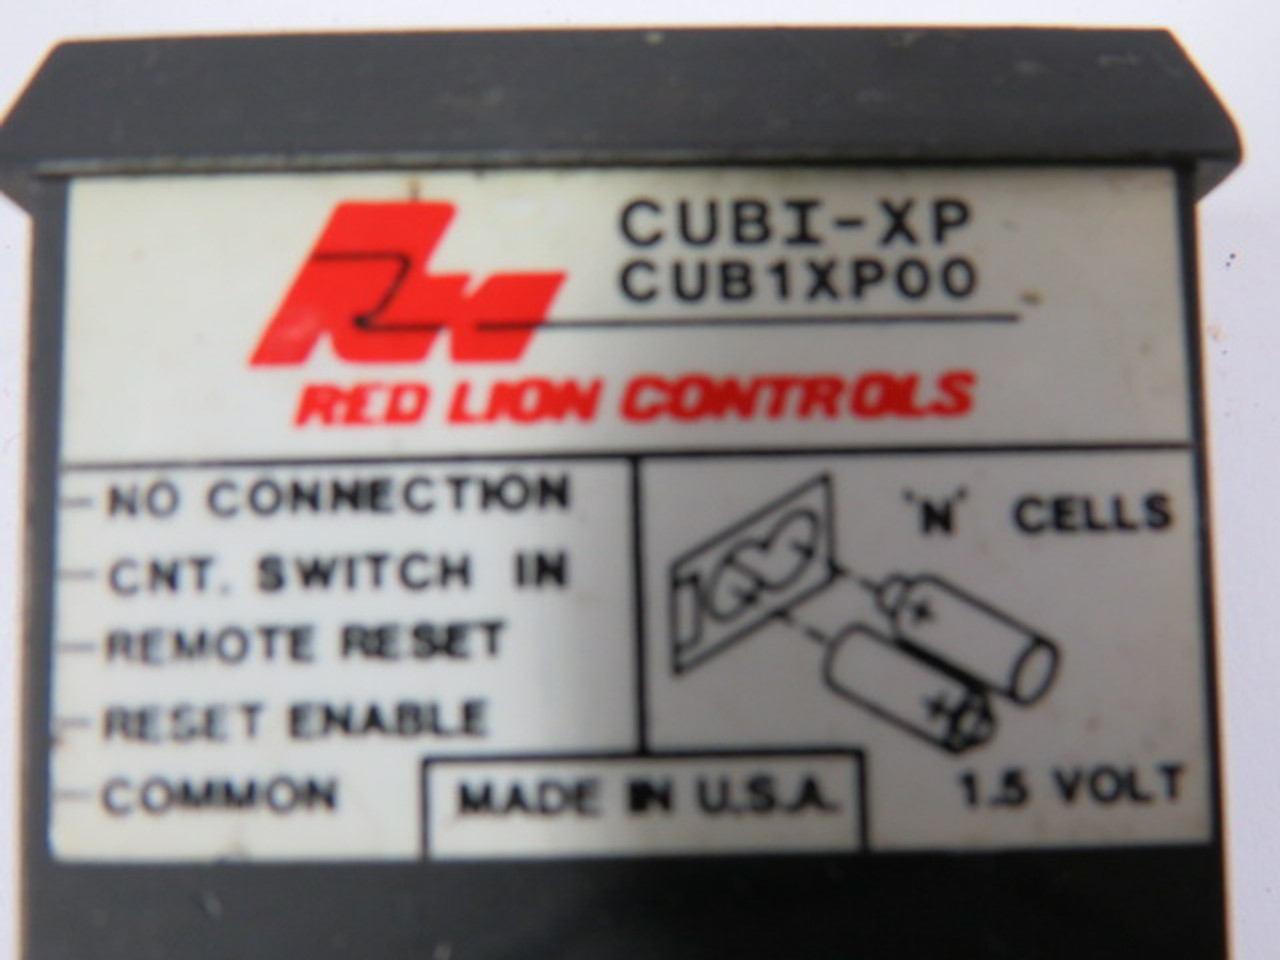 Red-Lion Controls CUB1XP00 6 Digit LCD Display Counter 3000CPM USED